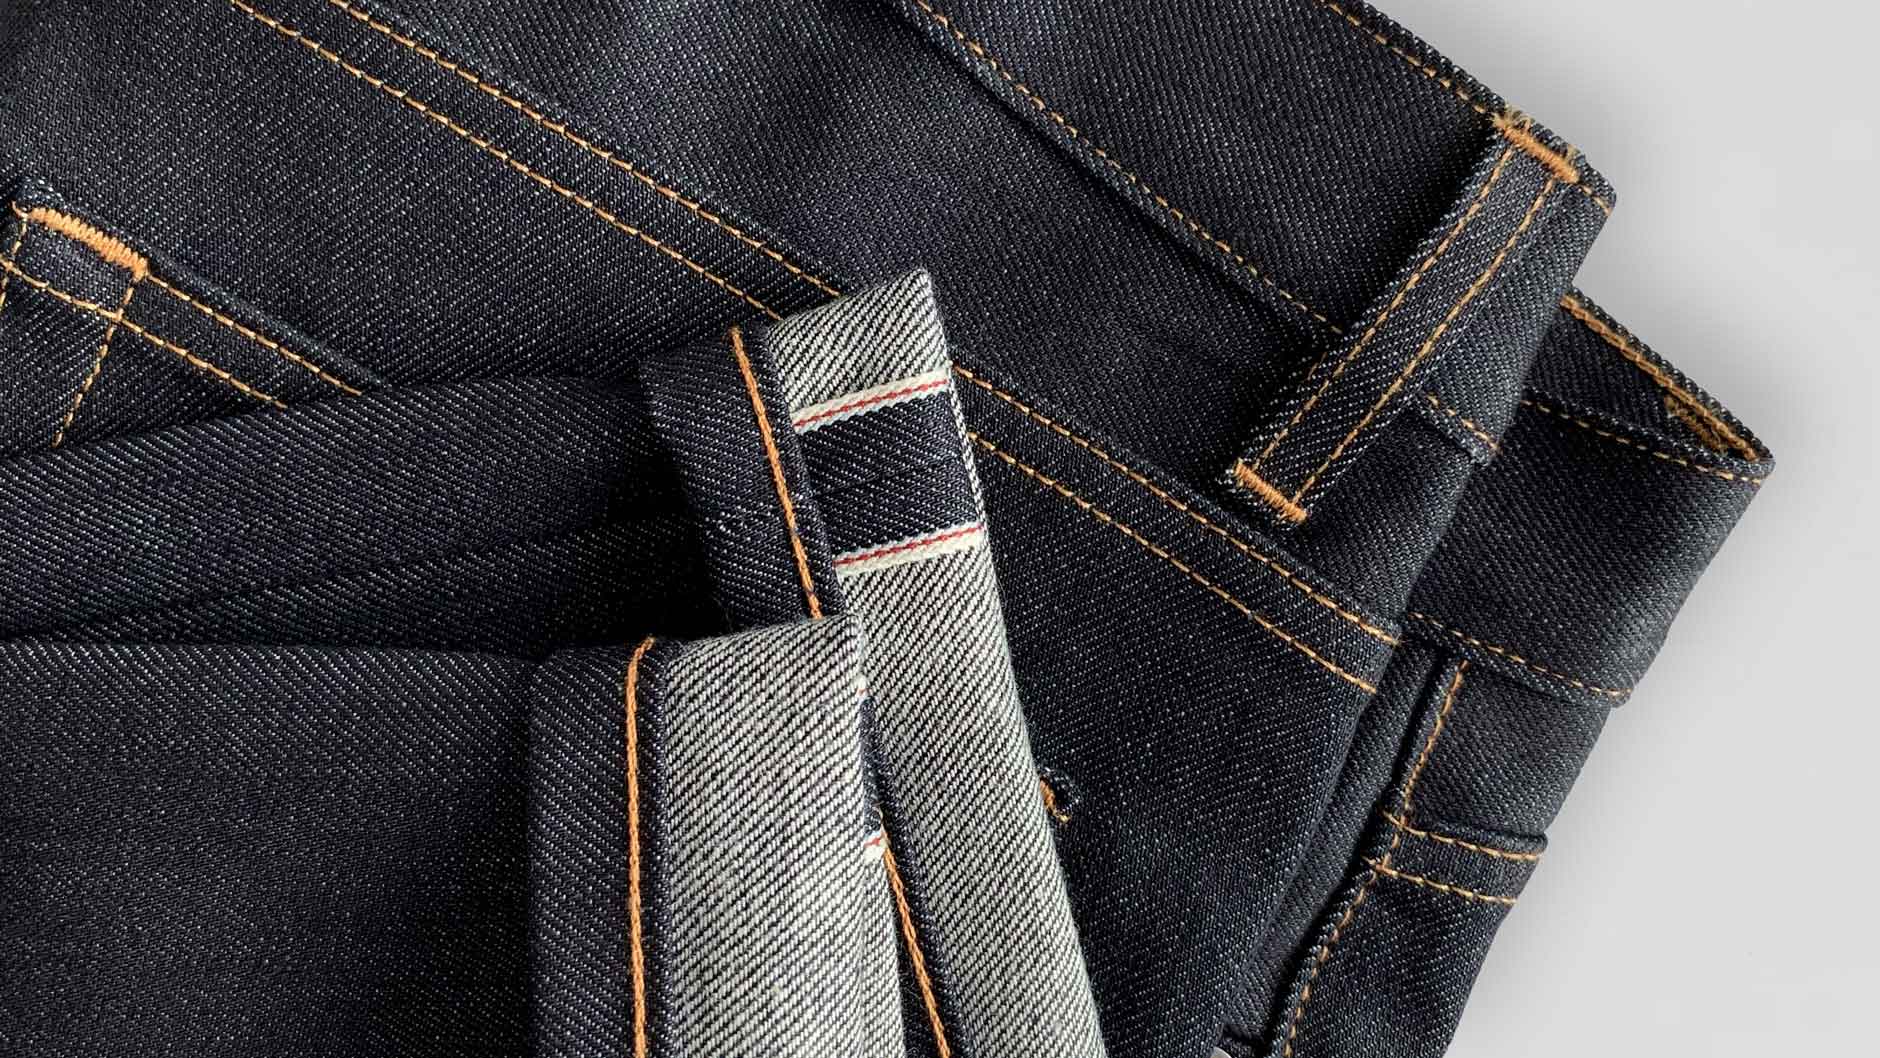 Organic raw selvedge sustainable denim jeans folded with turned cuff